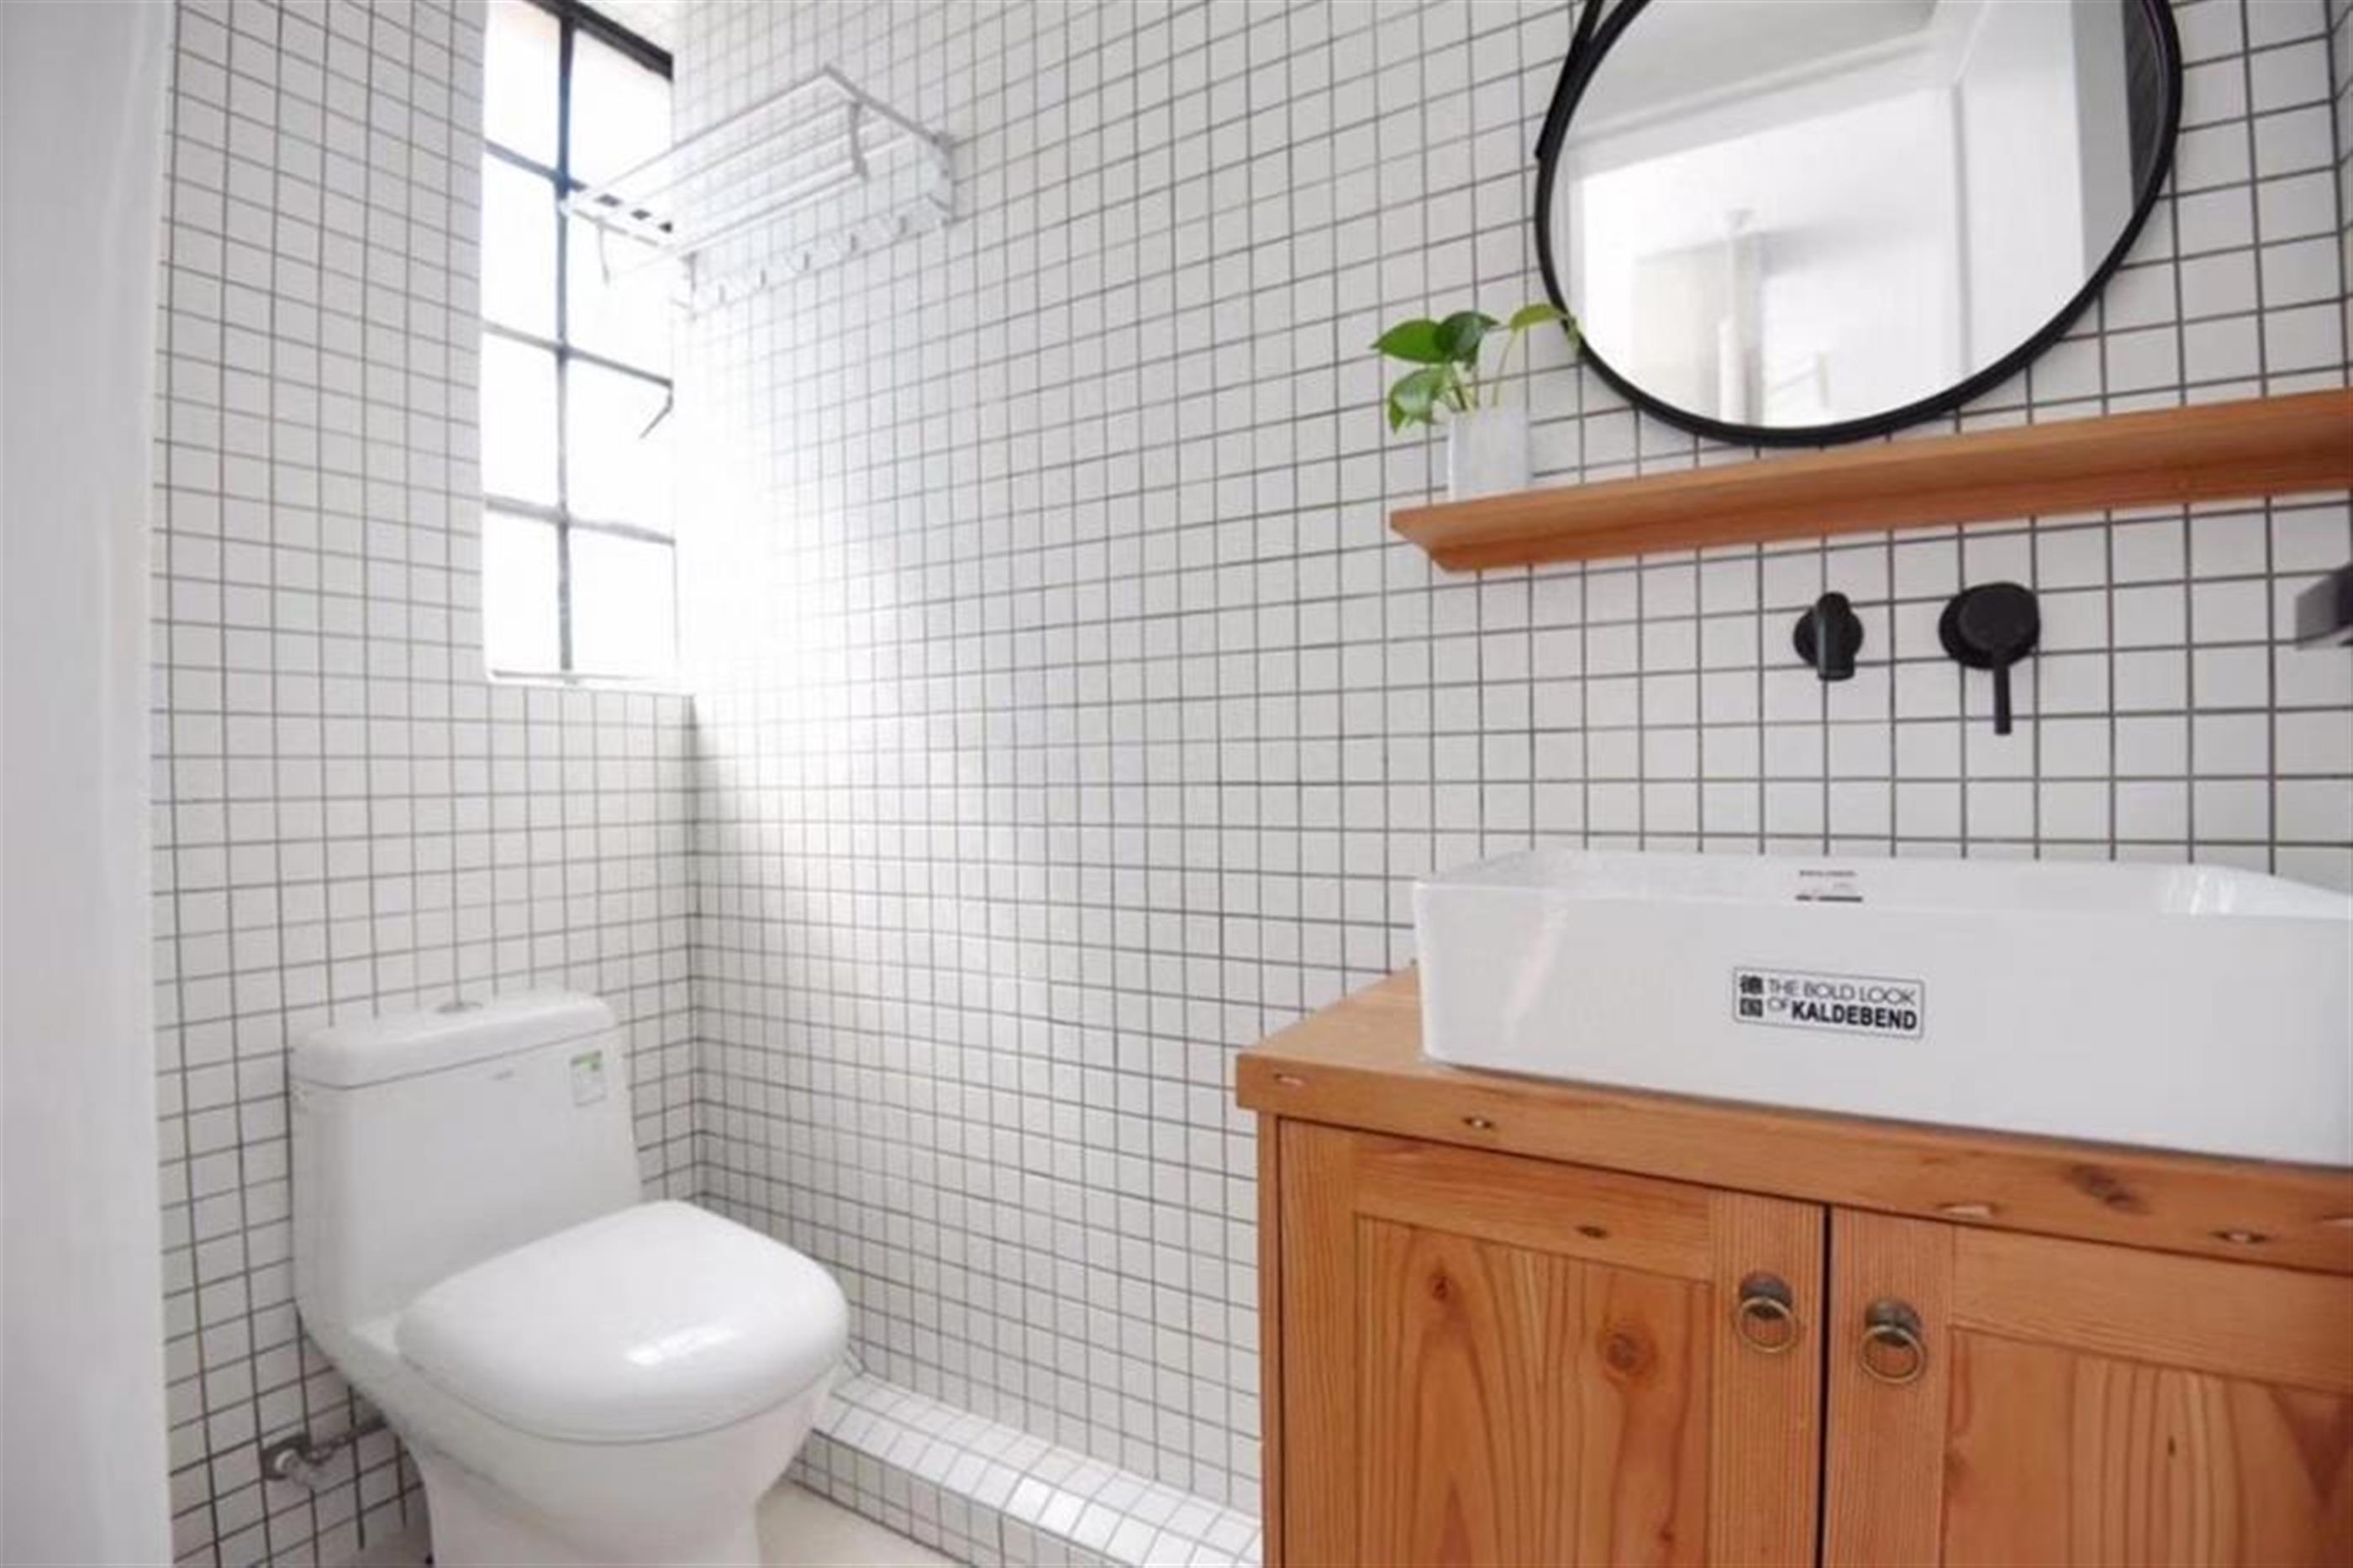 New bathroom fixtures Renovated Bright FFC Lane House Studio Apt Nr LN 1/10/12 for Rent in Shanghai